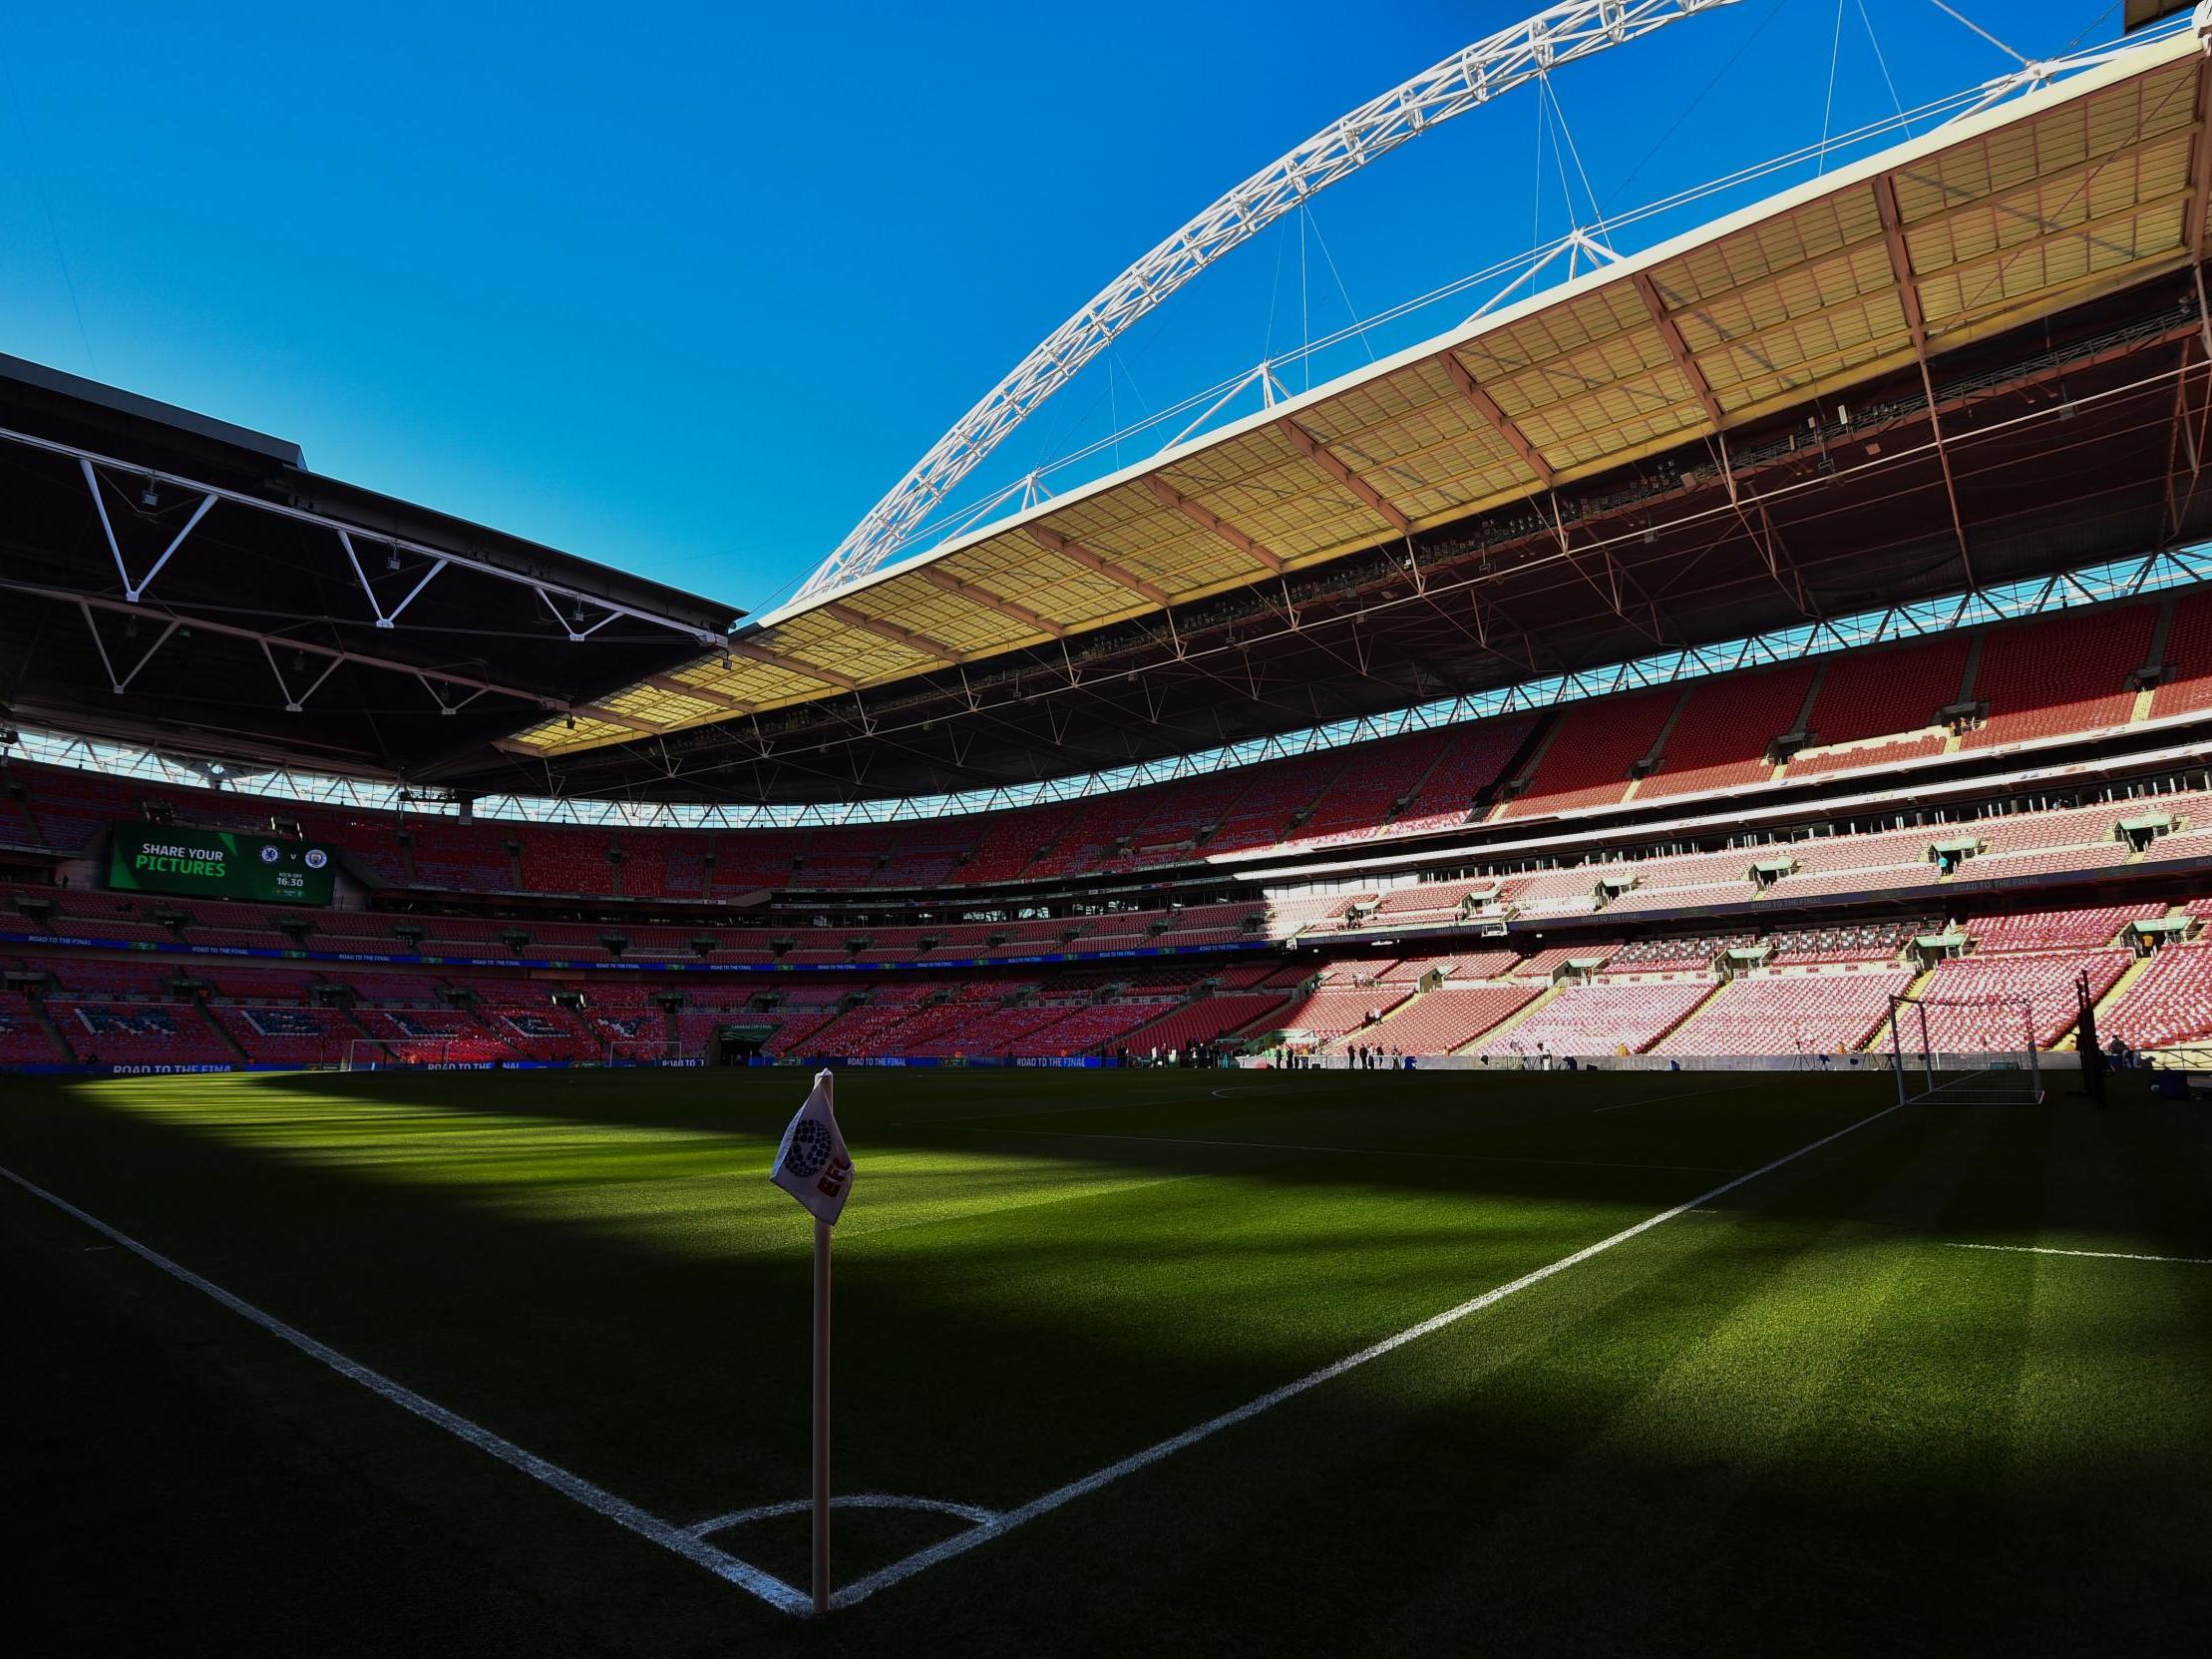 Wembley would stage the final